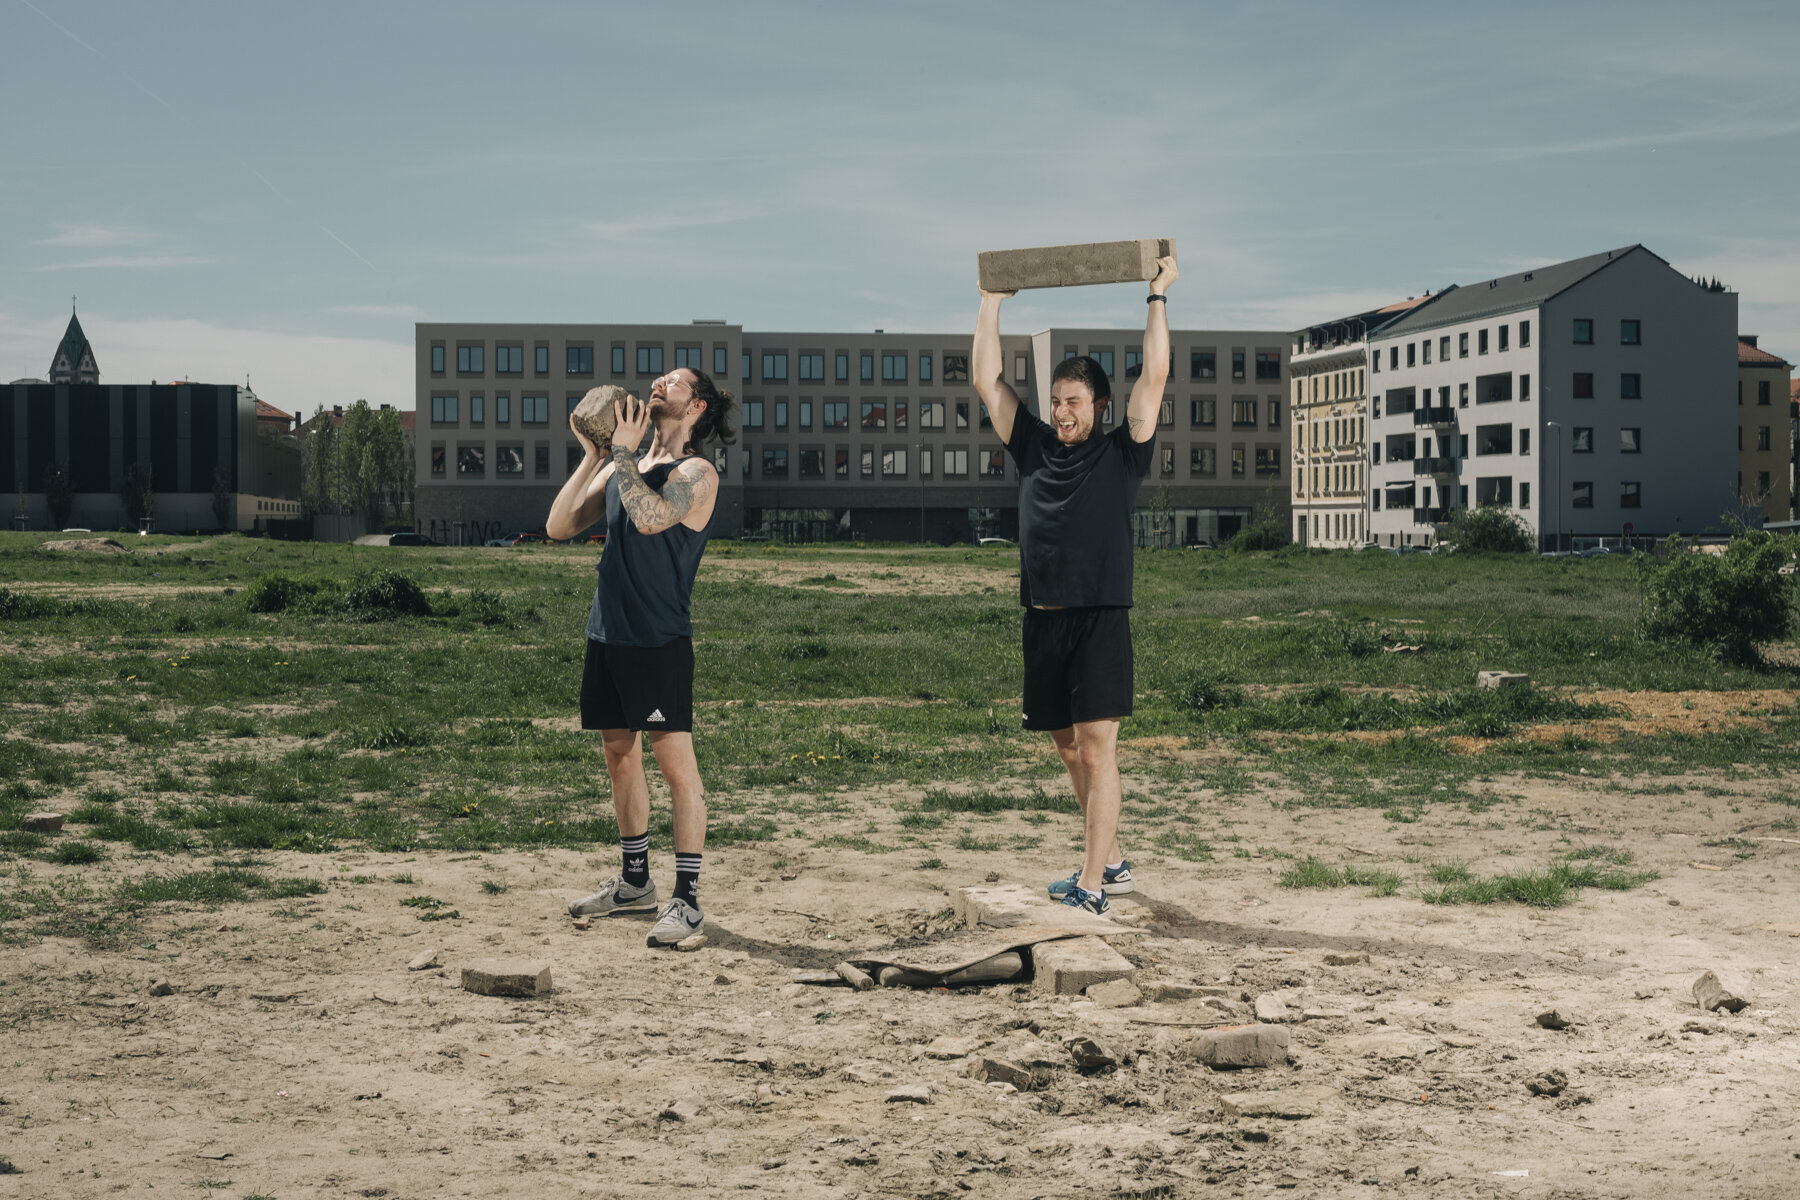  While fitness studios are closed, Max and his friend do their workout in the open air on a fallow land in Leipzig. 